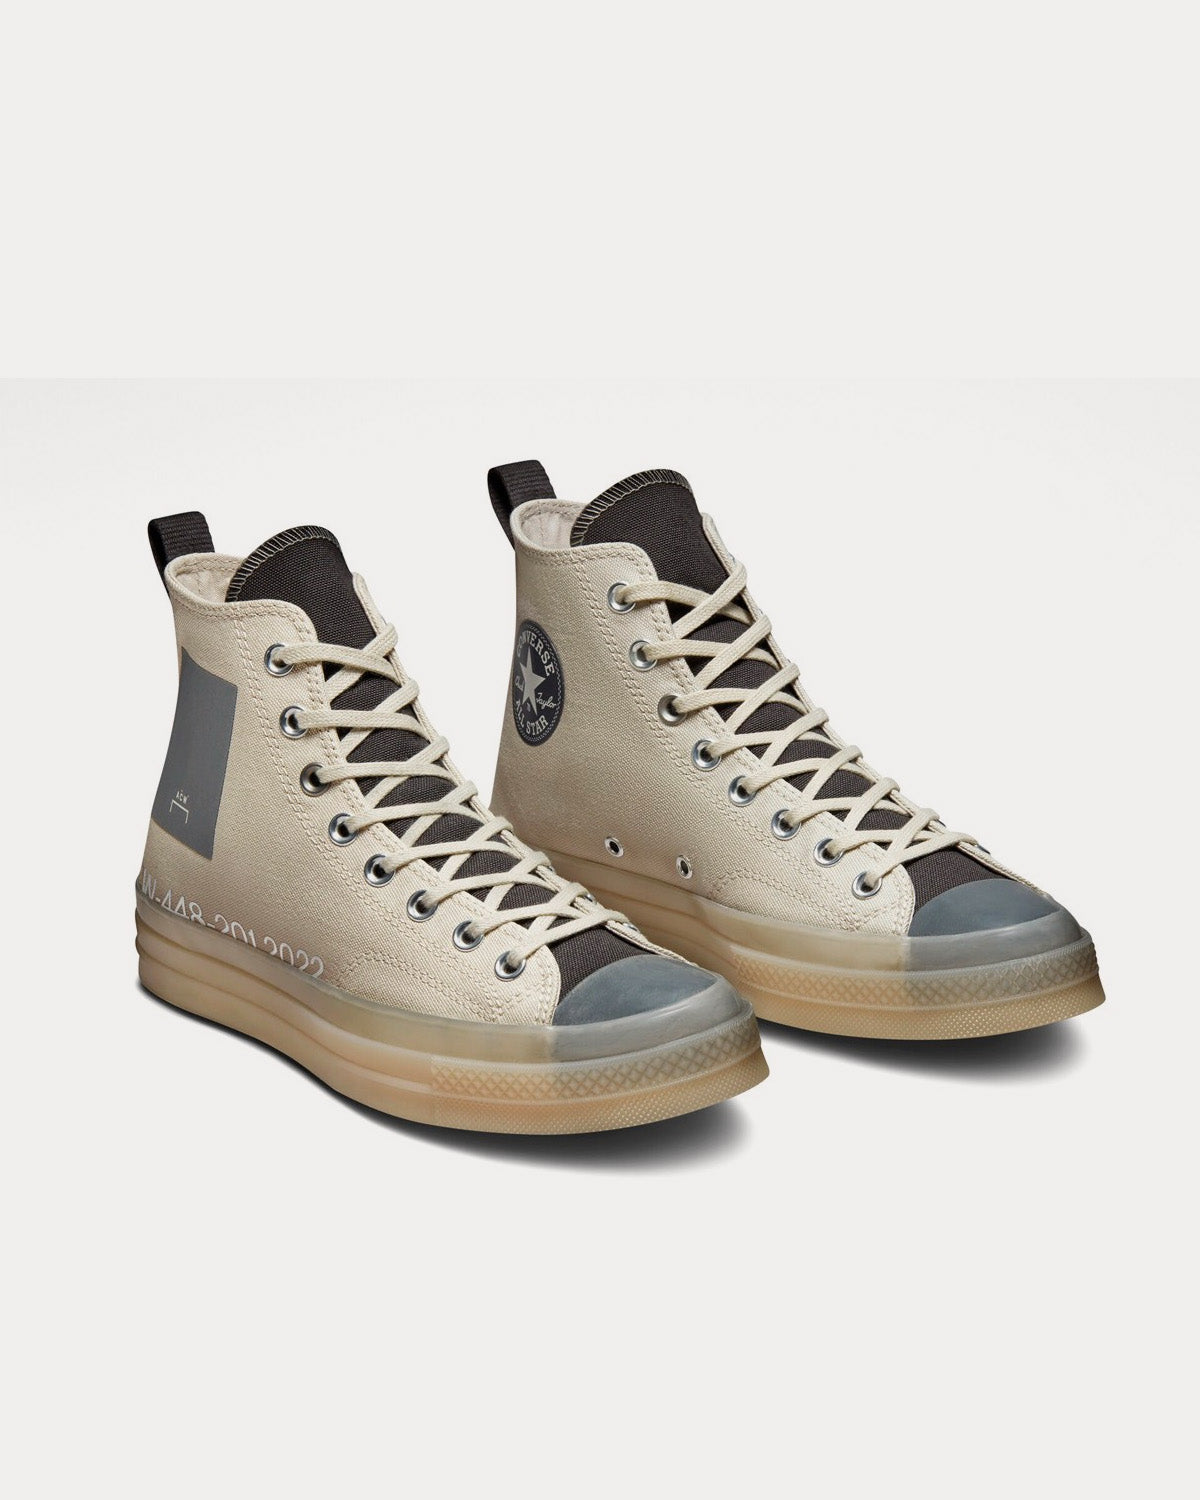 Converse x A-COLD-WALL* - Chuck 70 Silver Birch / Pavement High Top Sneakers